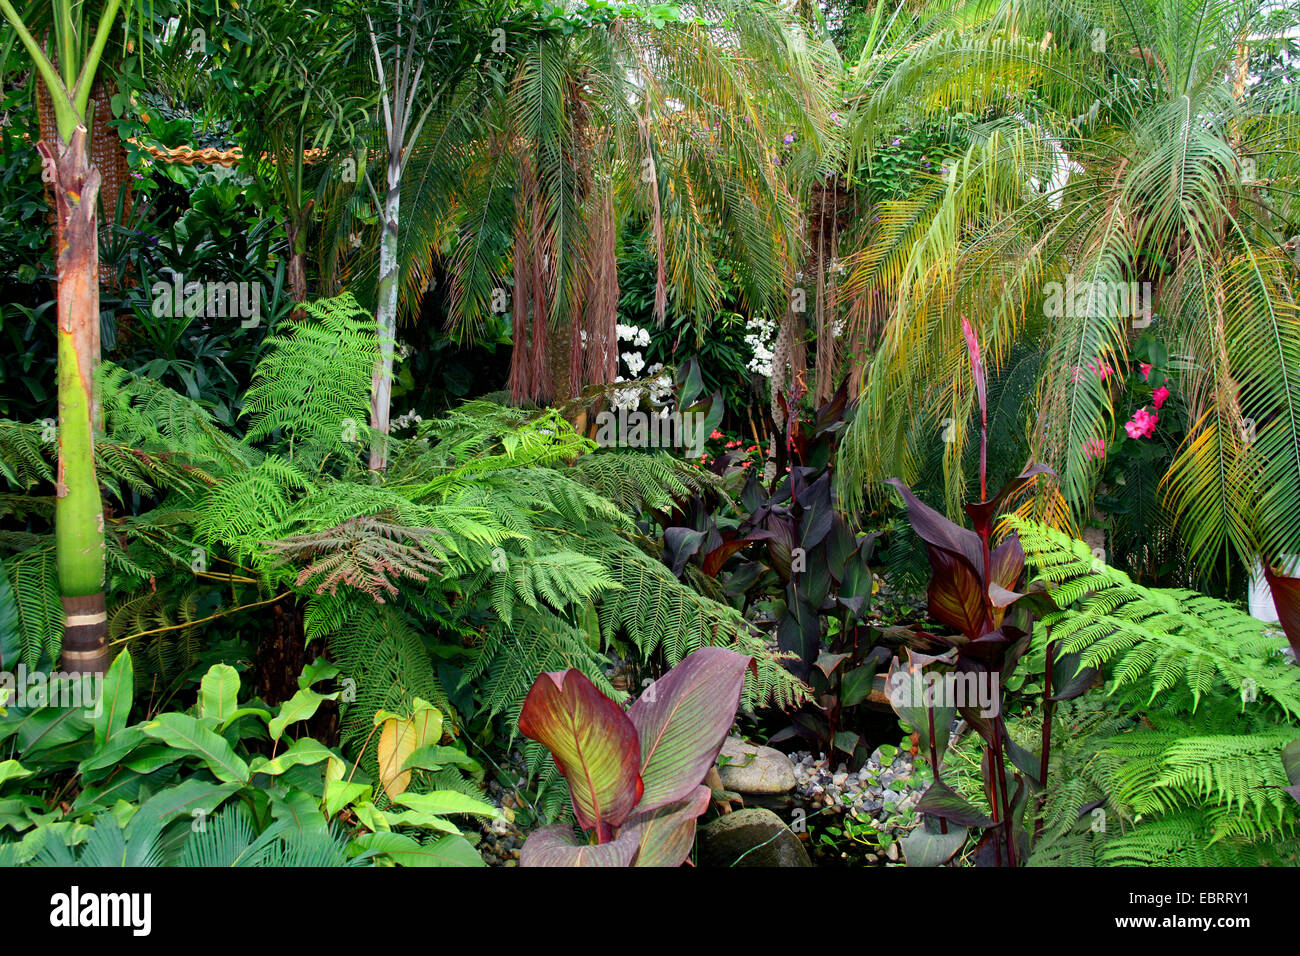 tropical plant in a tropical greenhouse with tree ferns, palmferns, and palms Stock Photo